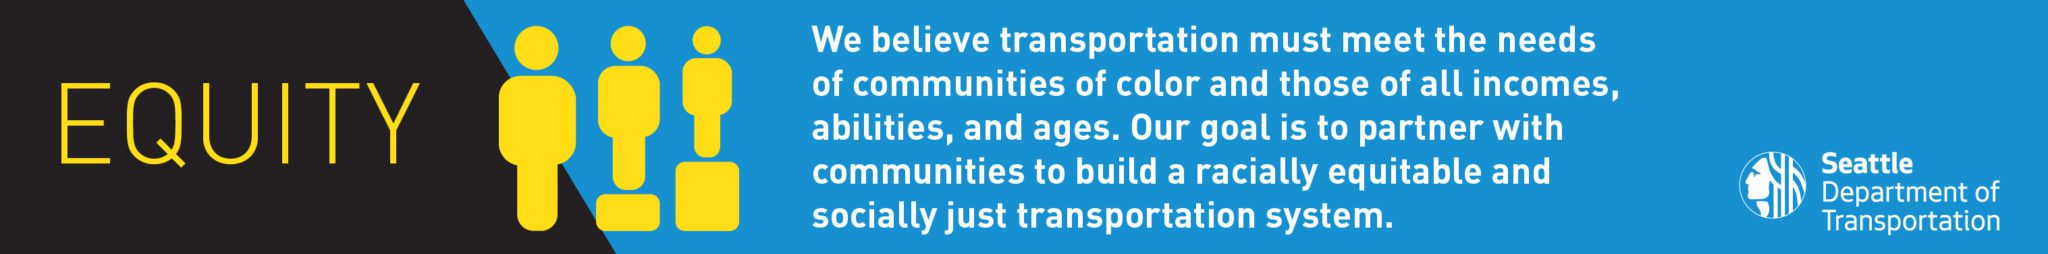 Graphic highlighting equity as one of SDOT's core values and goals. The word equity is in large font, with a small infographic of three people to illustrate the concept.